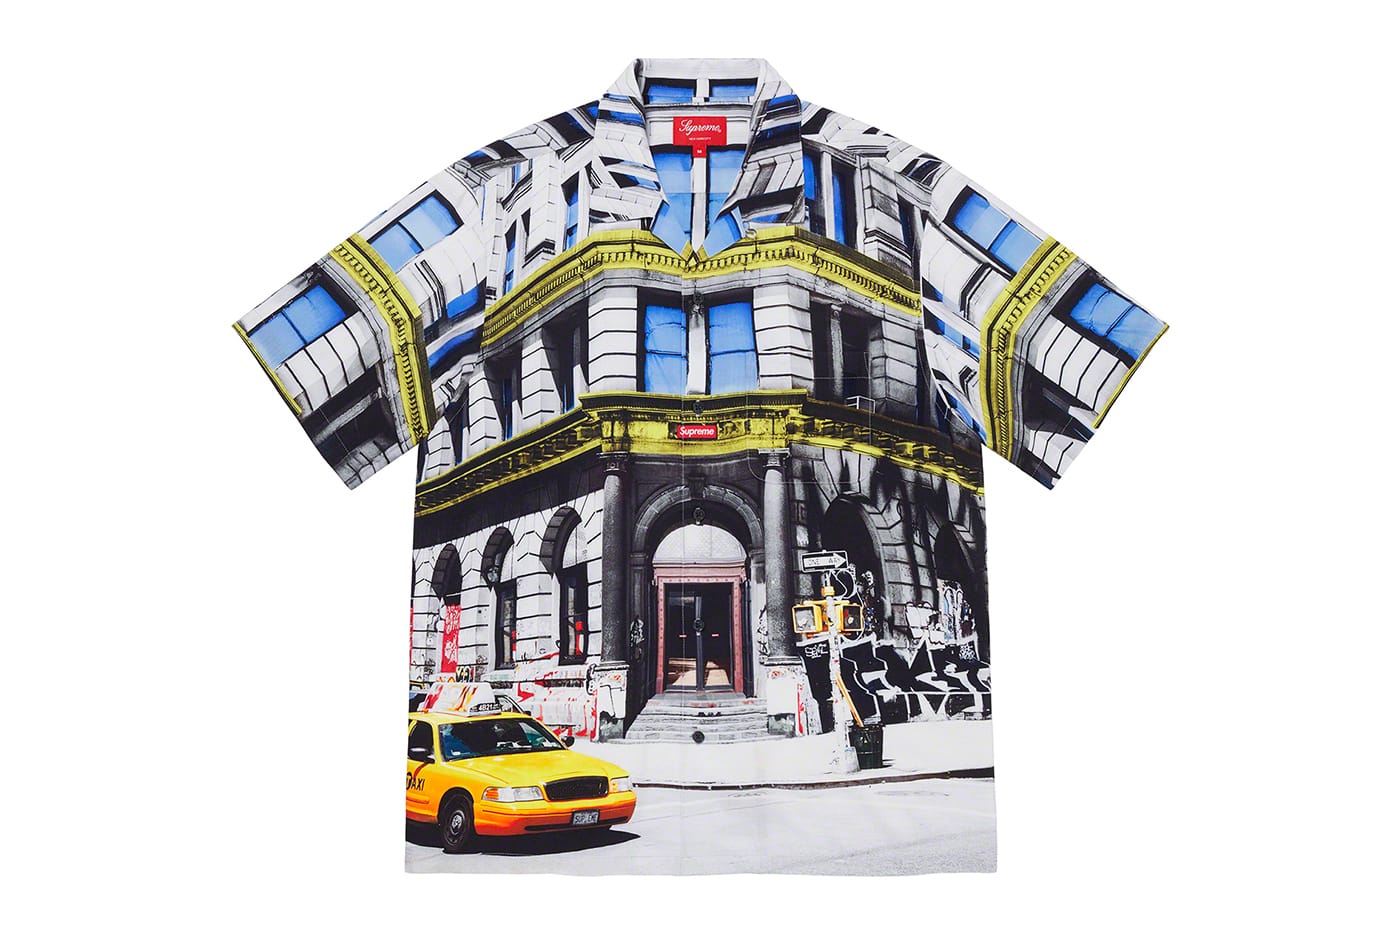 Supreme Spring/Summer 2021 Tops and Shirts | HYPEBEAST